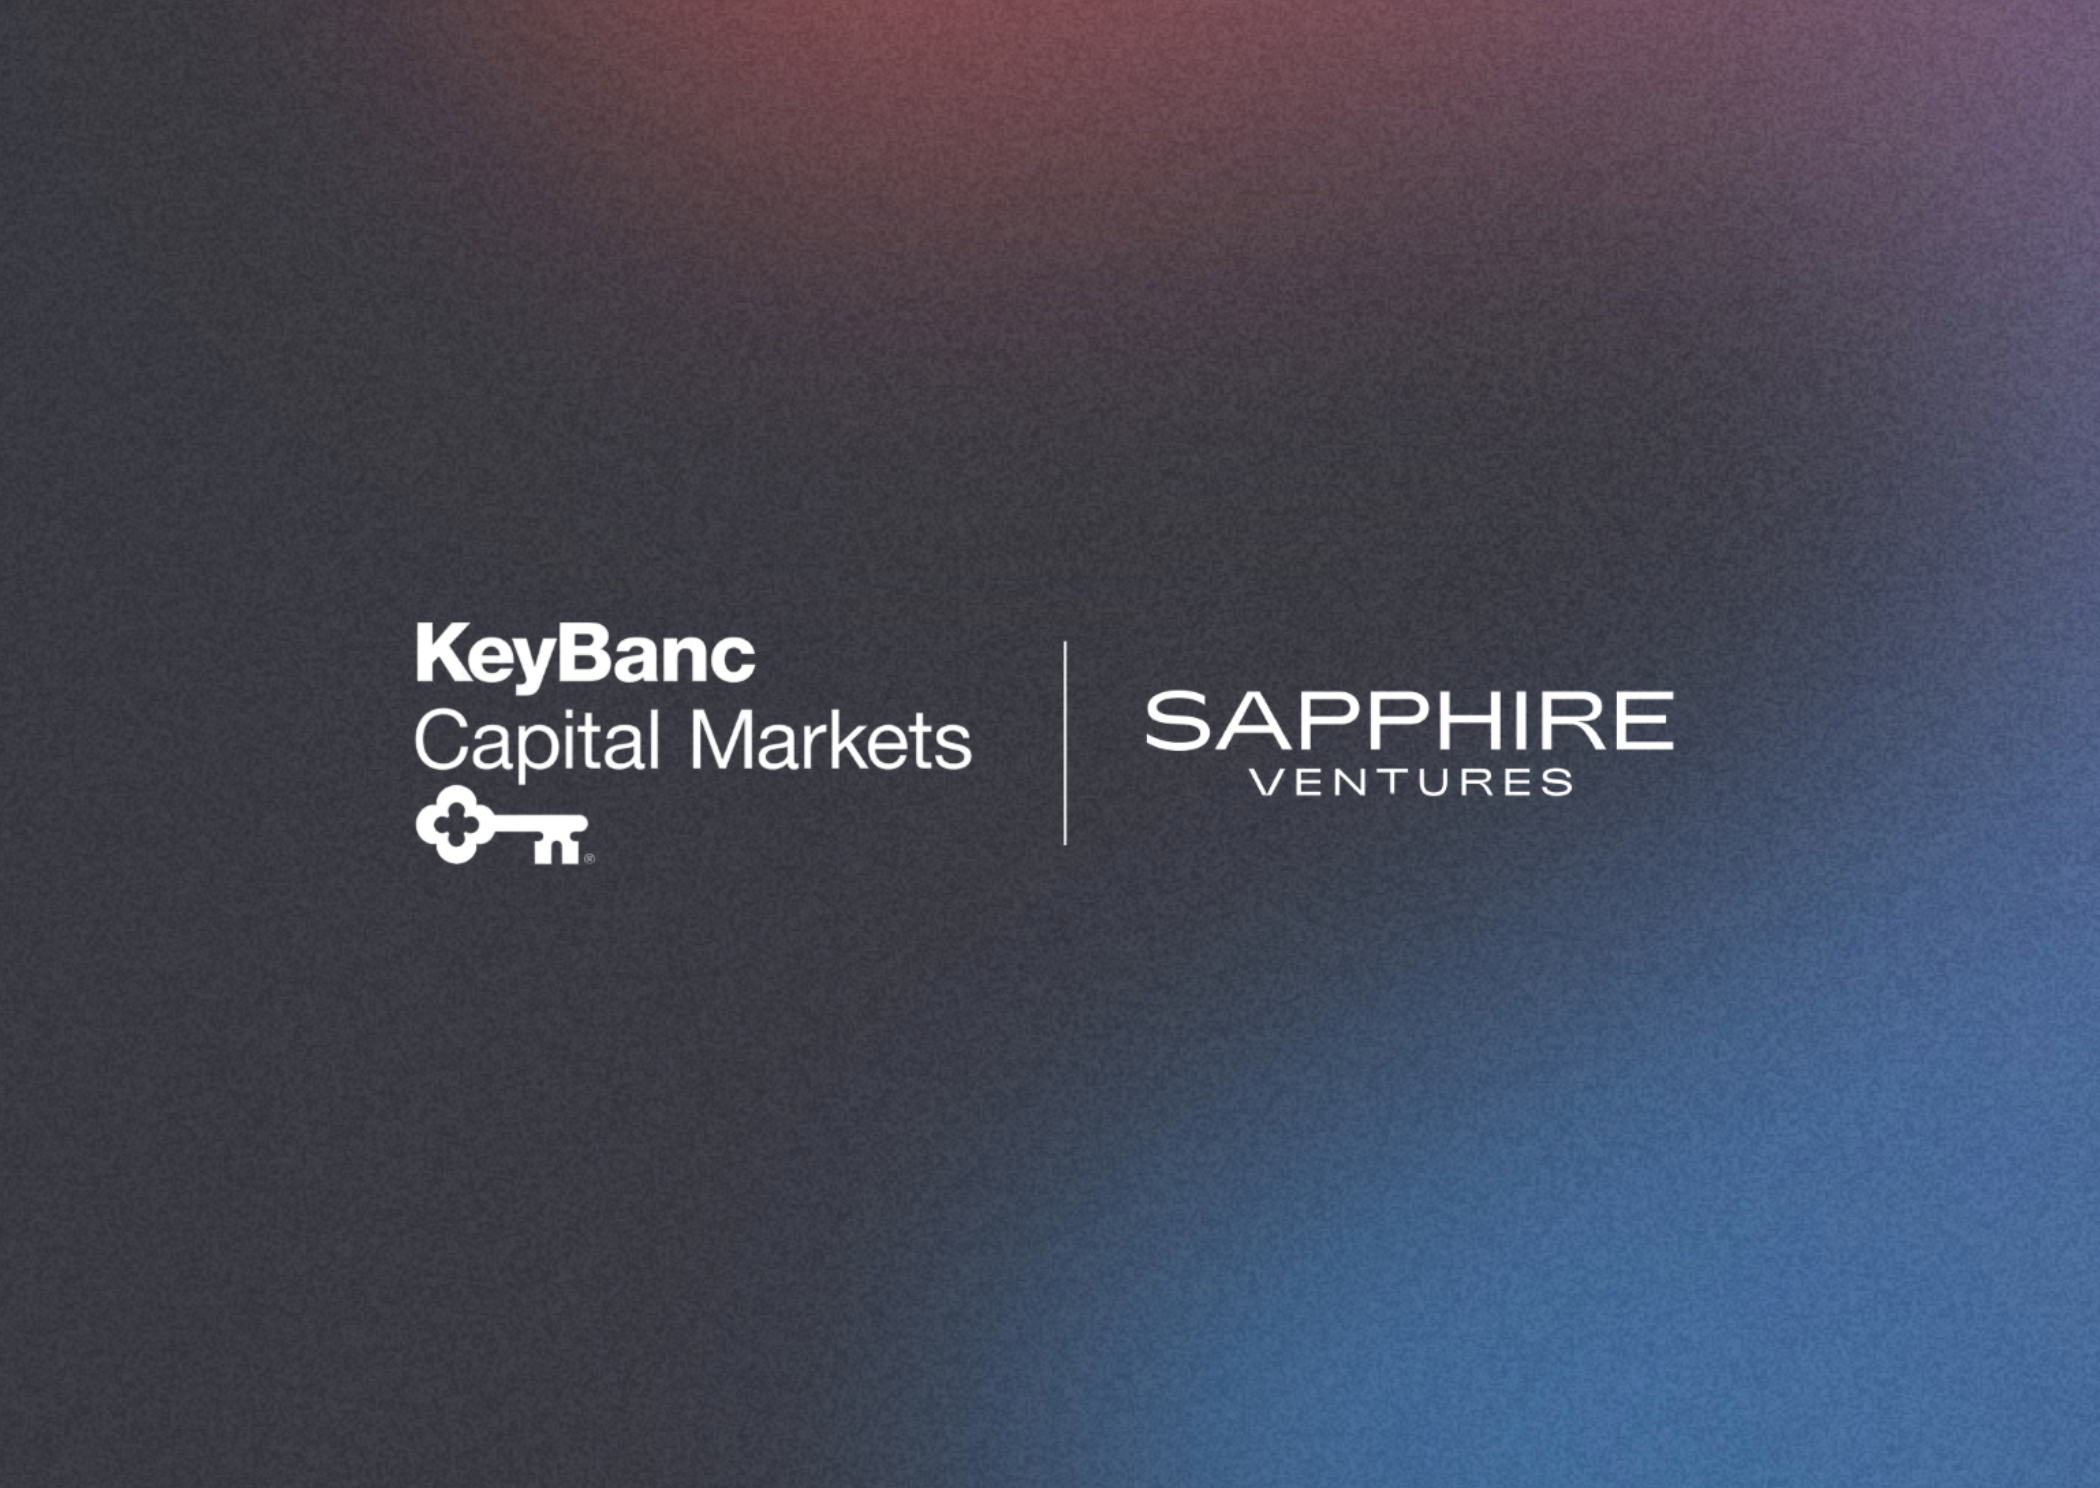 KeyBanc and Sapphire Ventures logos